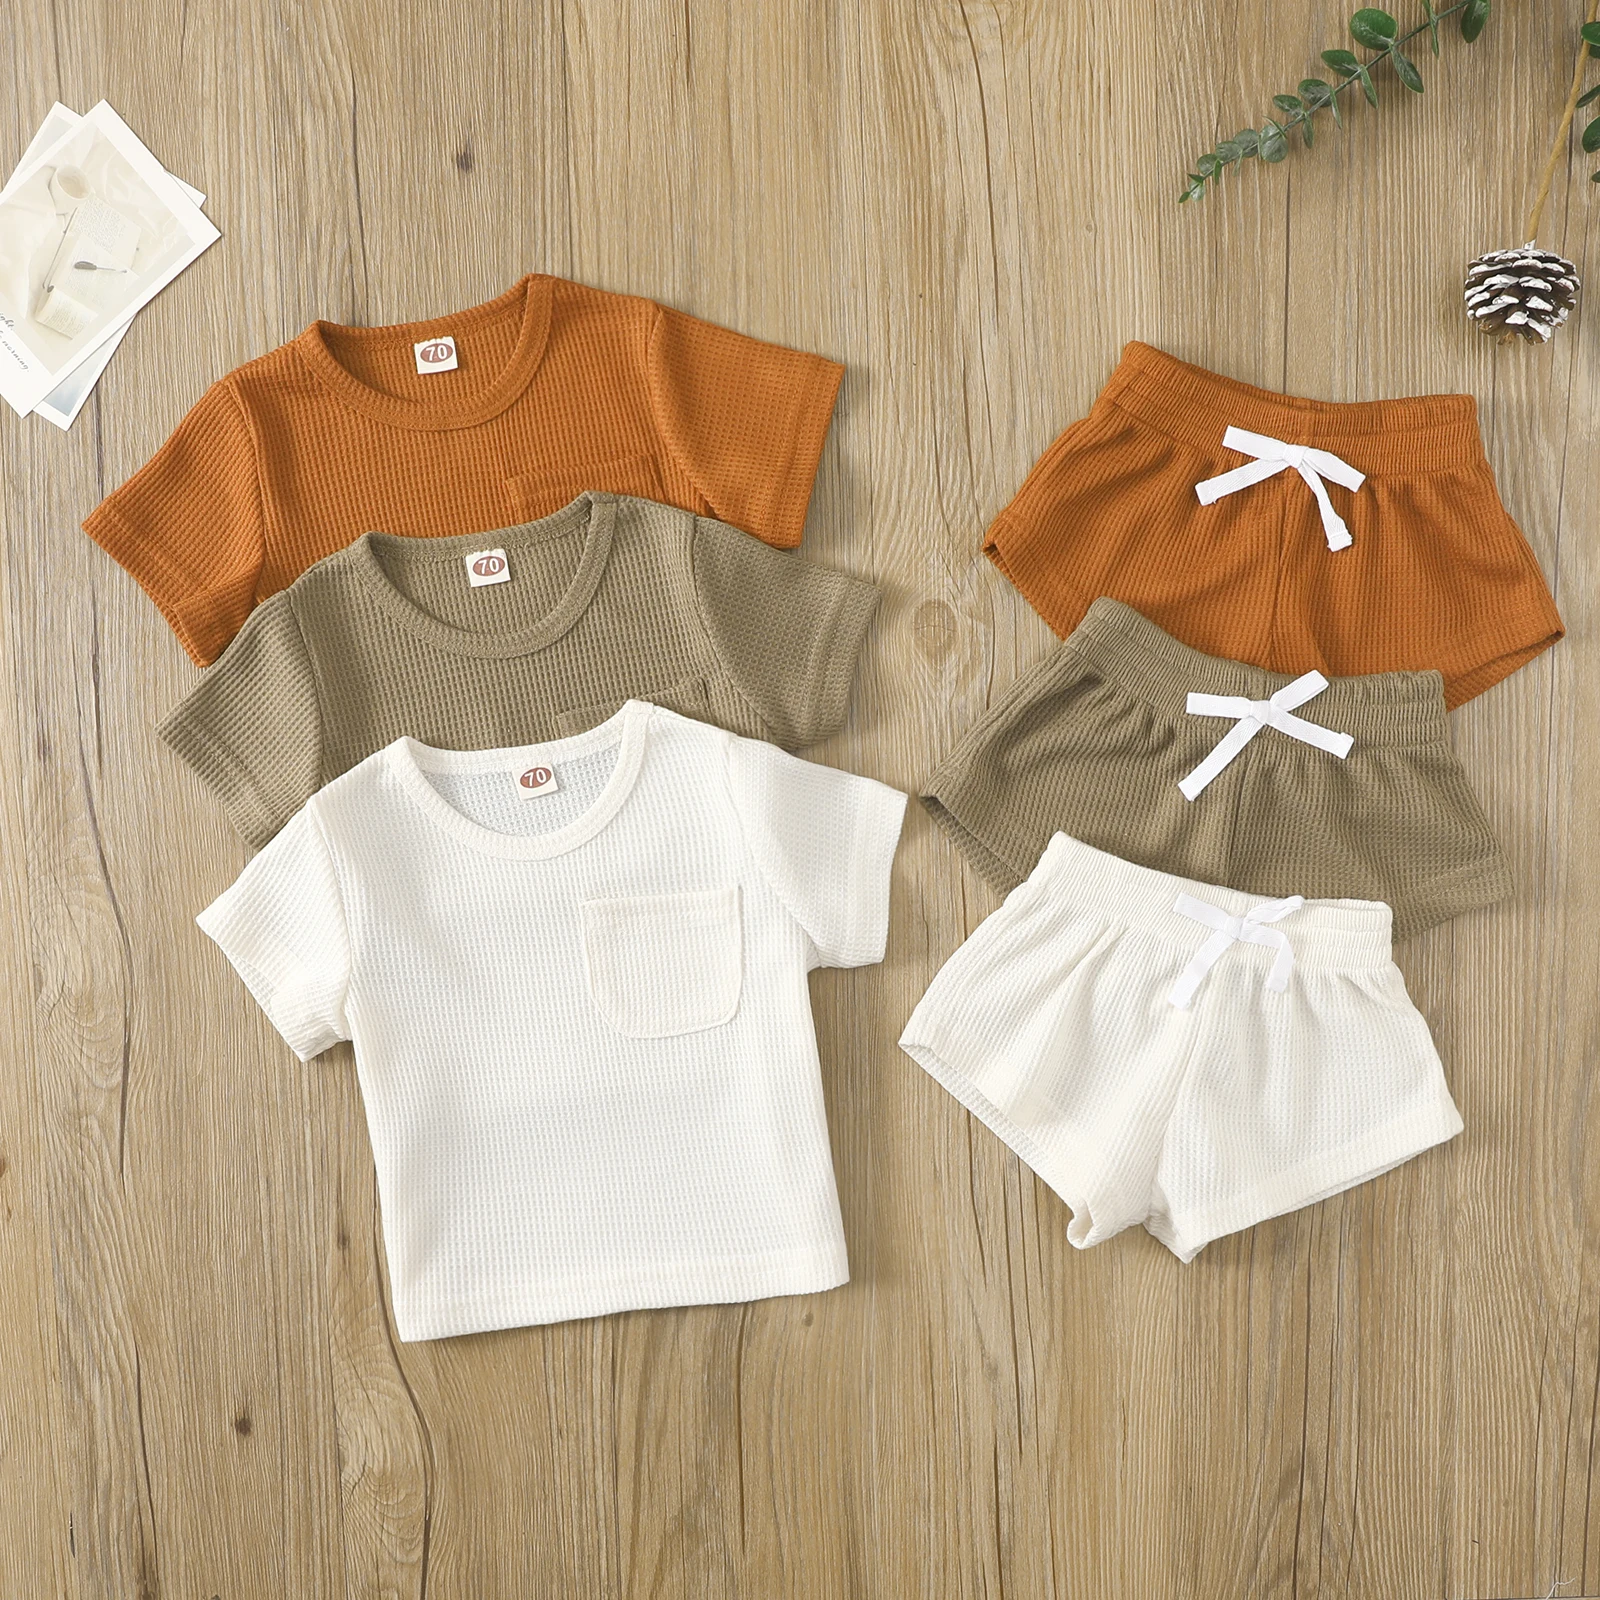 newborn baby clothing set Ma&Baby 0-3Years Toddler Infant Baby Boy Girl Clothes Set Button Short Sleeve T shirt Shorts Summer Outfits Costumes D35 vintage Baby Clothing Set